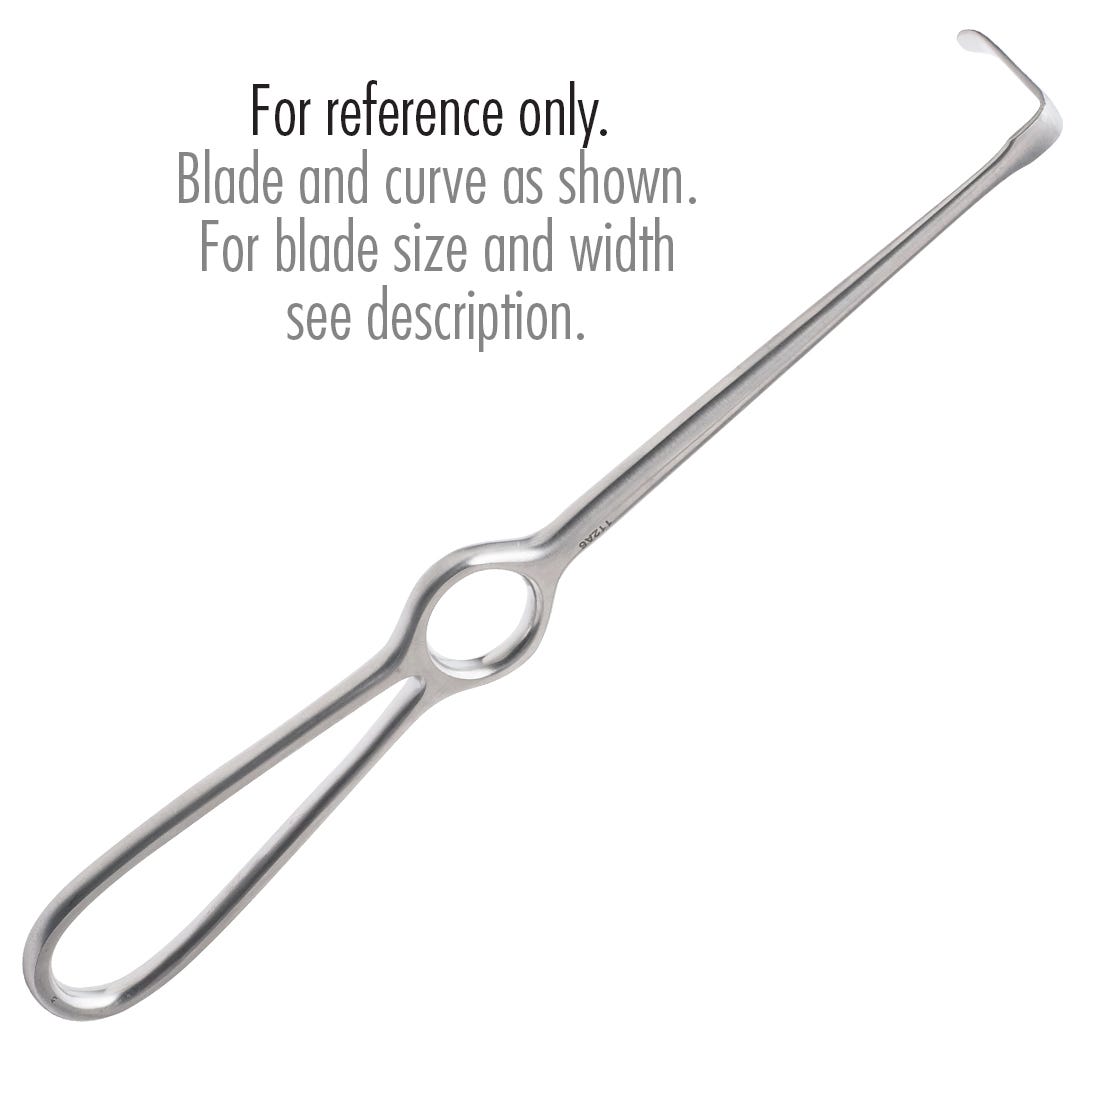 Obwegeser Type Surgical Retractor Standard, Curved Down, 16mm x 80mm